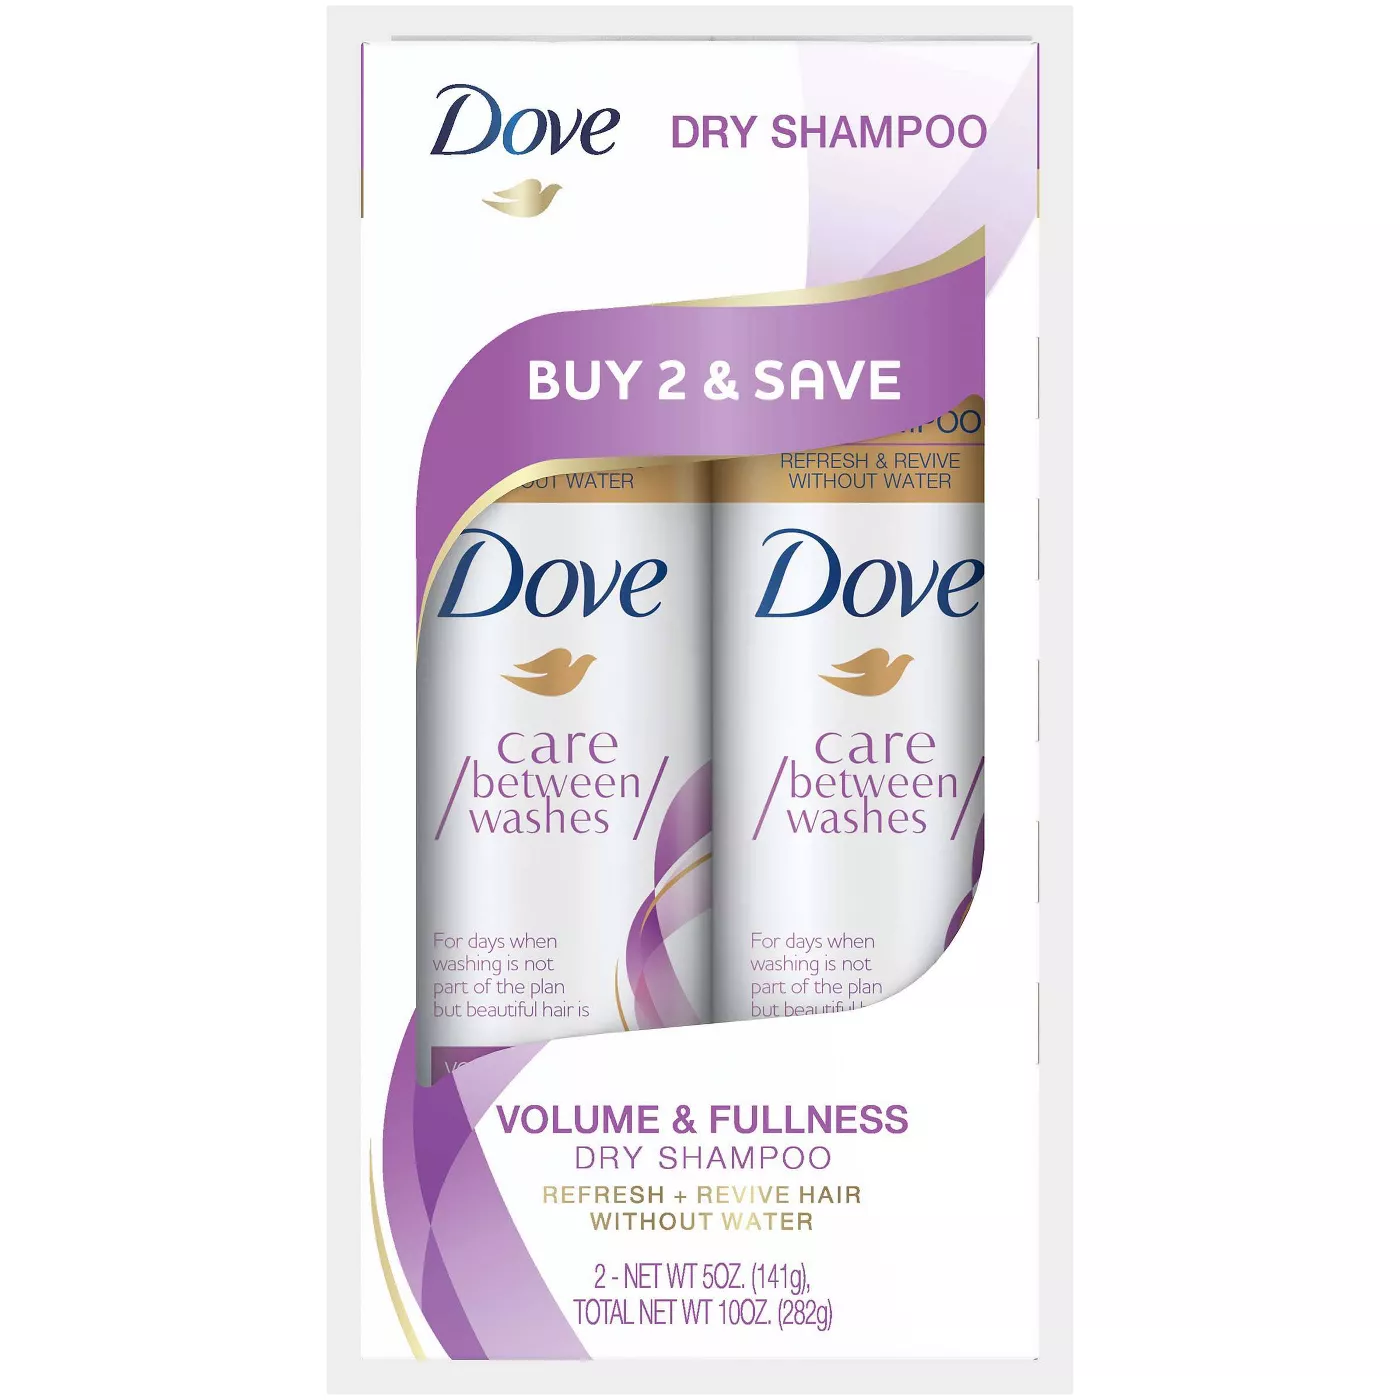 Dove Beauty Care Between Washes 5oz Dry Shampoo Volume & Fullness 2 Pack